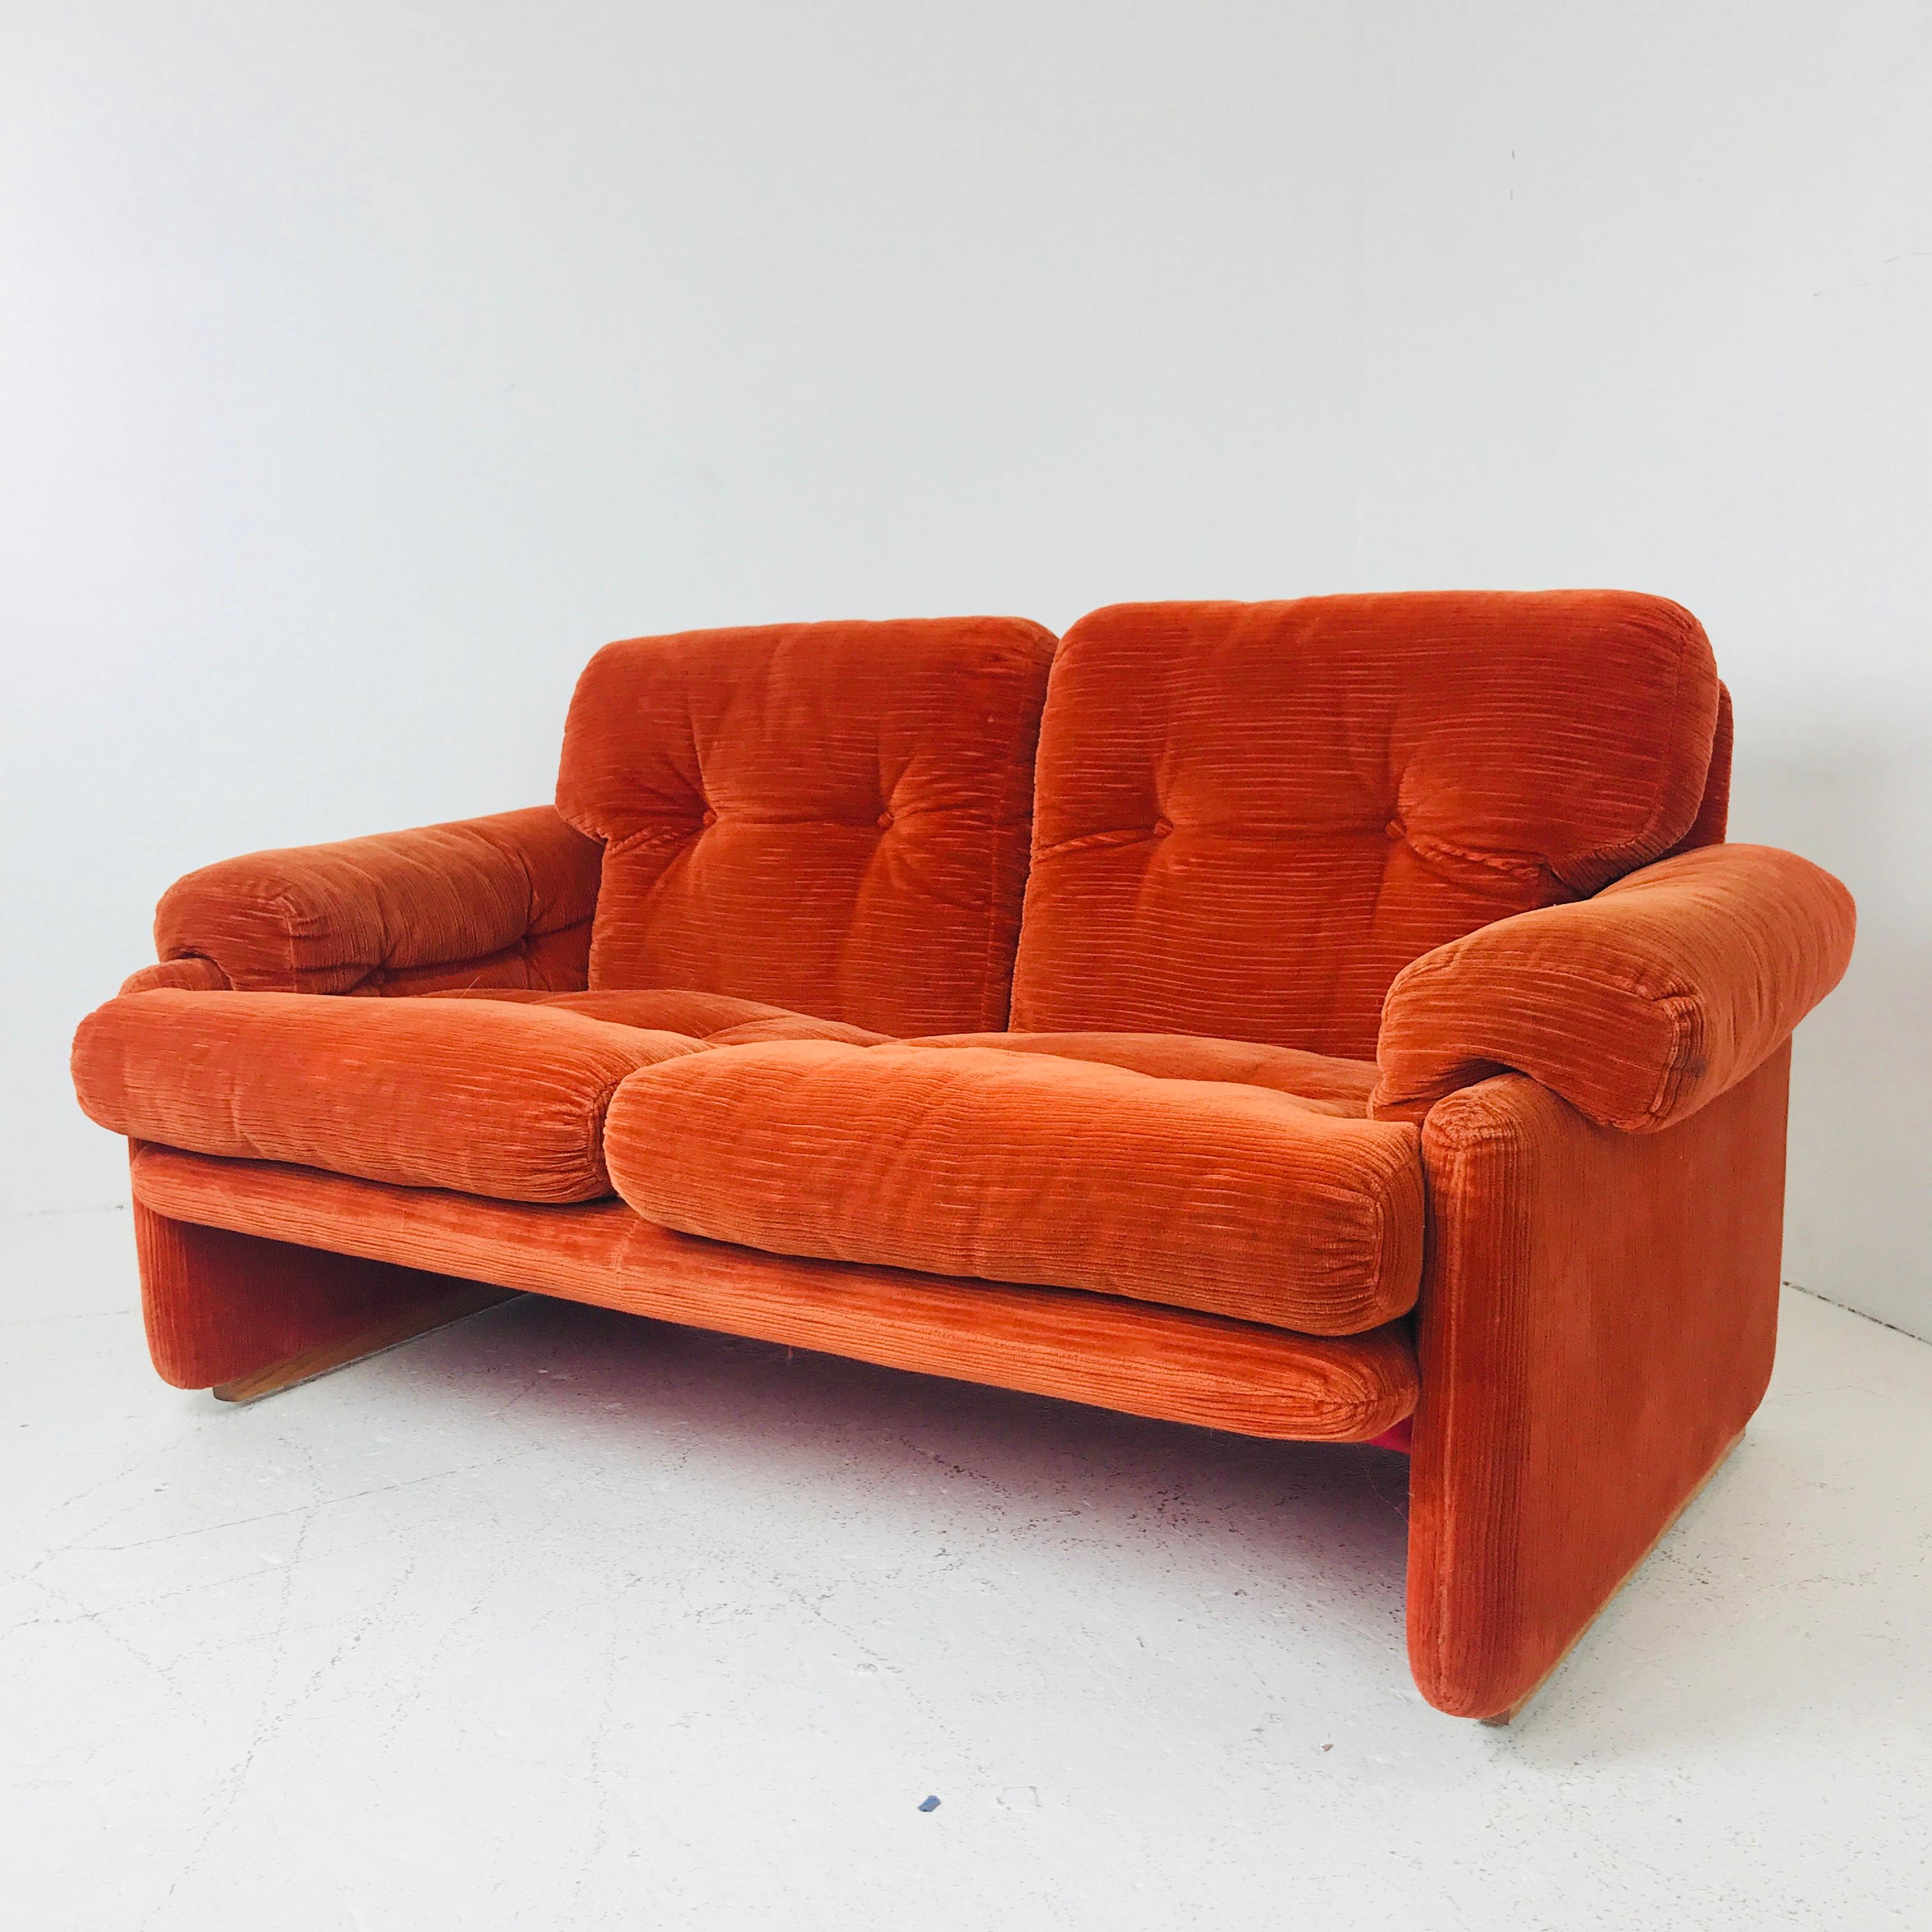 Orange Settee/Loveset by Tobia Scarpa for B&B Italia. Sofa is lightweight and in good vintage condition with original fabric, circa 1970s.
Small tear in fabric on back of settee near foot.

Dimensions:
60w x 34d x 27h
seat height 17